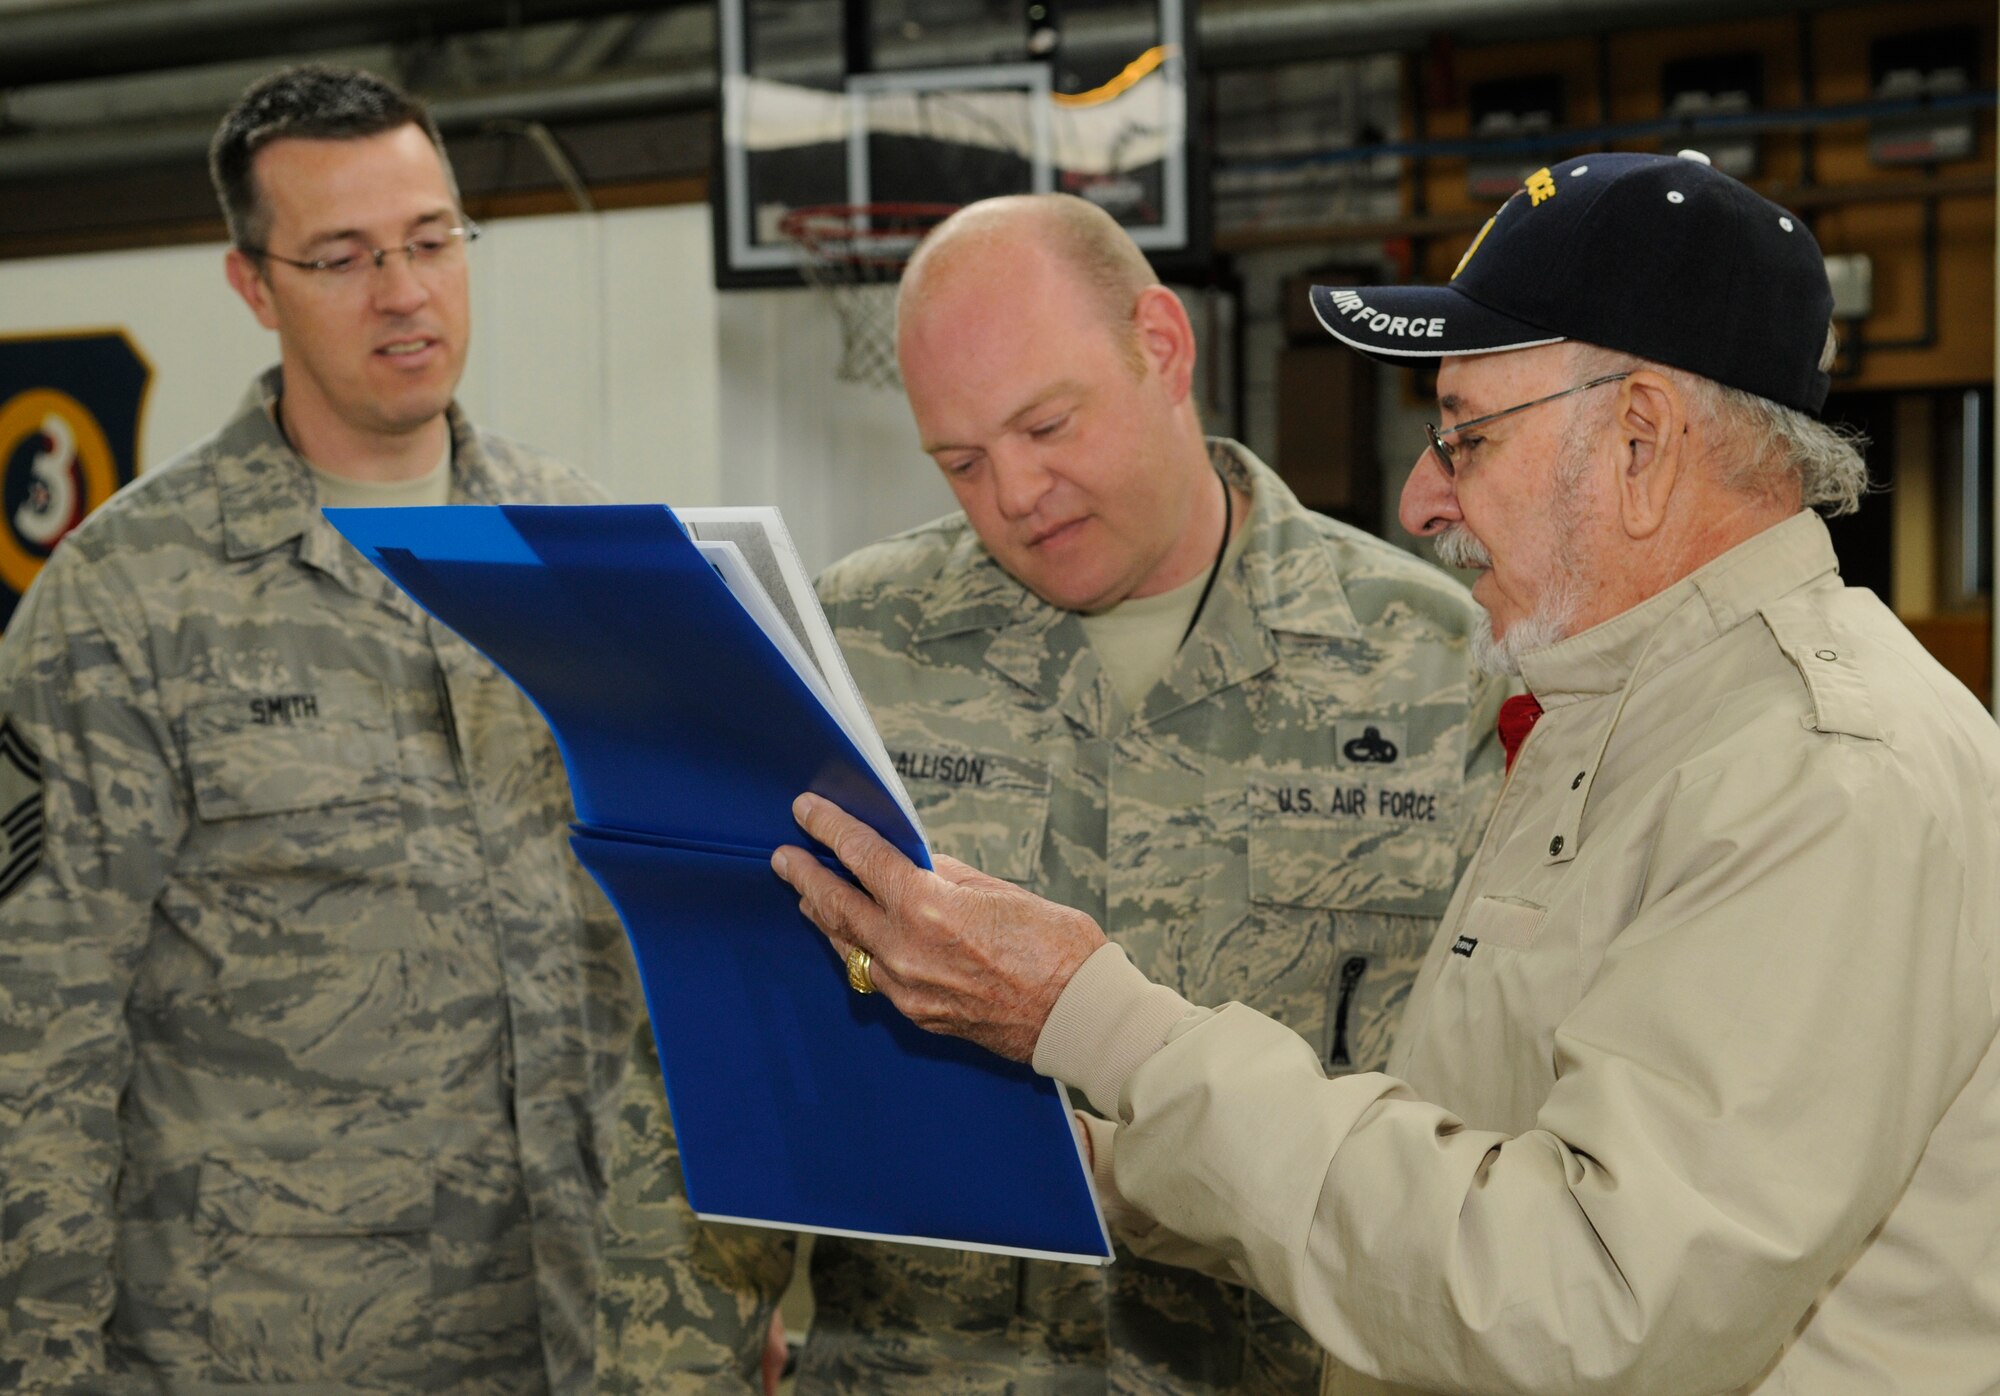 SPANGDAHLEM AIR BASE, Germany – Omar Garcia, right, flips through a book of photos with Master Sgt. Jason Allison, center, 52nd Maintenance Operations Squadron loading standardization crew chief, and Senior Master Sgt. Daniel Smith, left, 52nd MOS superintendent, during his visit here May 7. Mr. Garcia was the first crew chief to be stationed at Spangdahlem and worked on the L-5 Sentinel from 1951 to 1954. (U.S. Air Force photo/Senior Airman Benjamin Wilson)